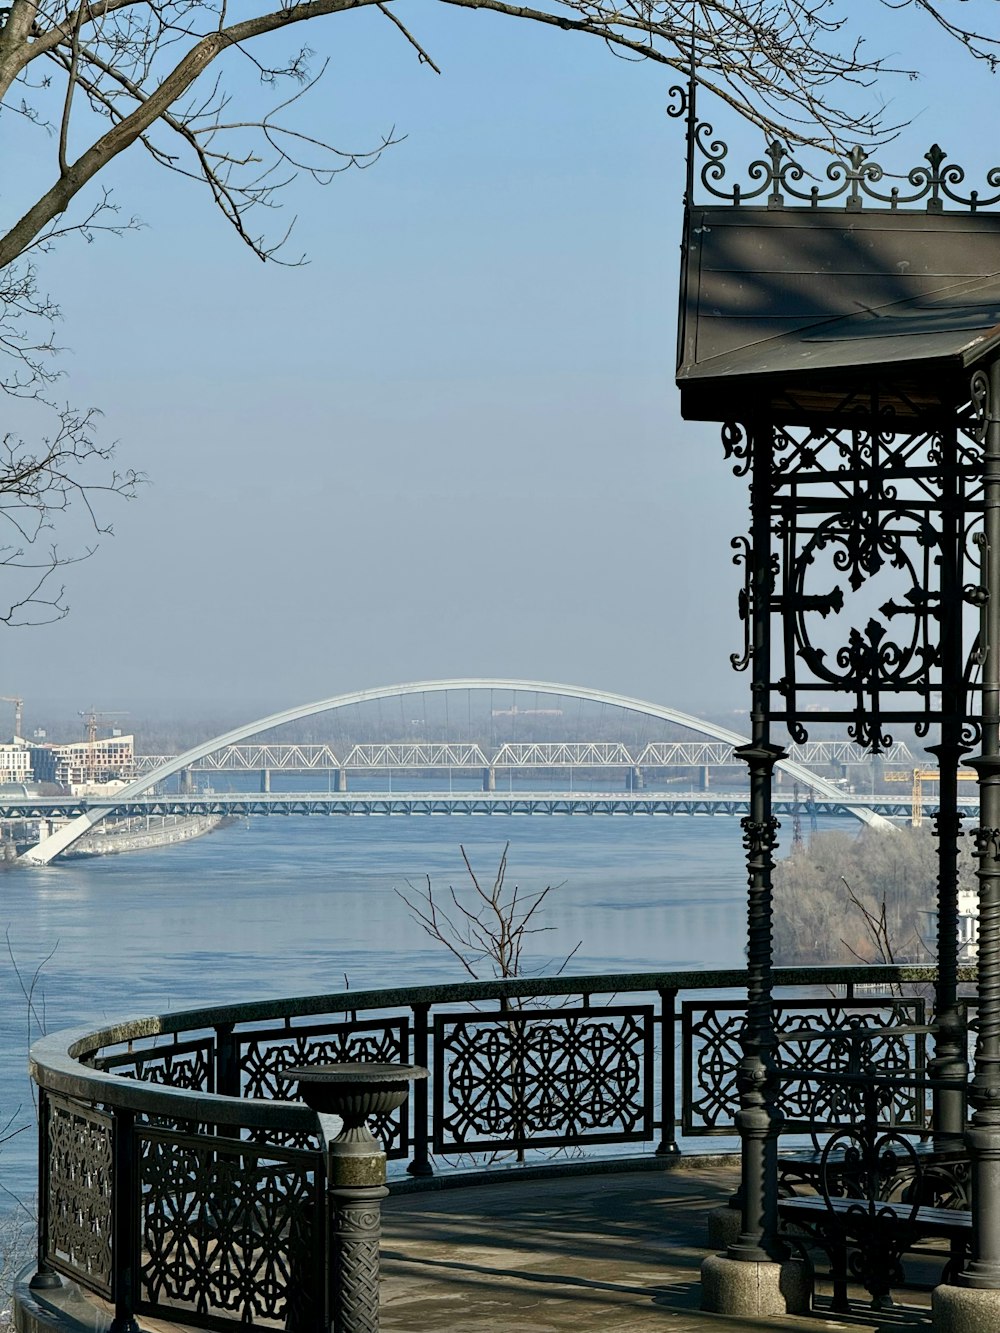 a view of a bridge over a large body of water